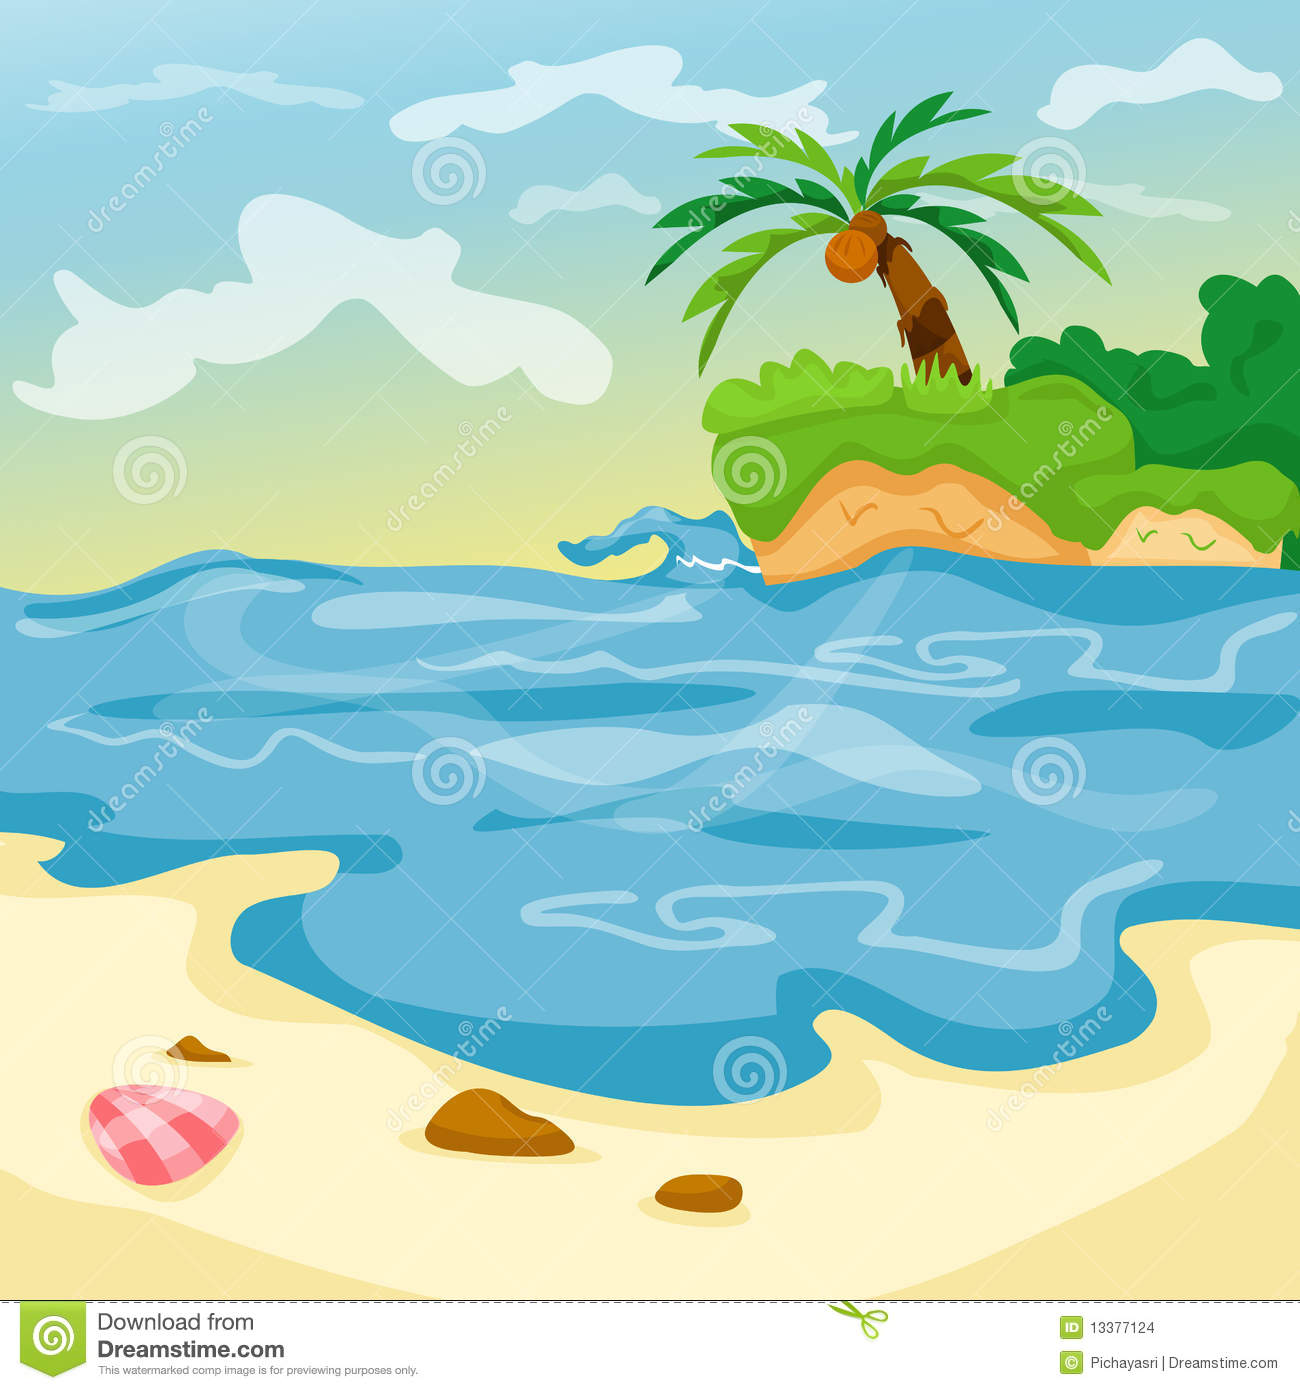 Seascape clipart #5, Download drawings